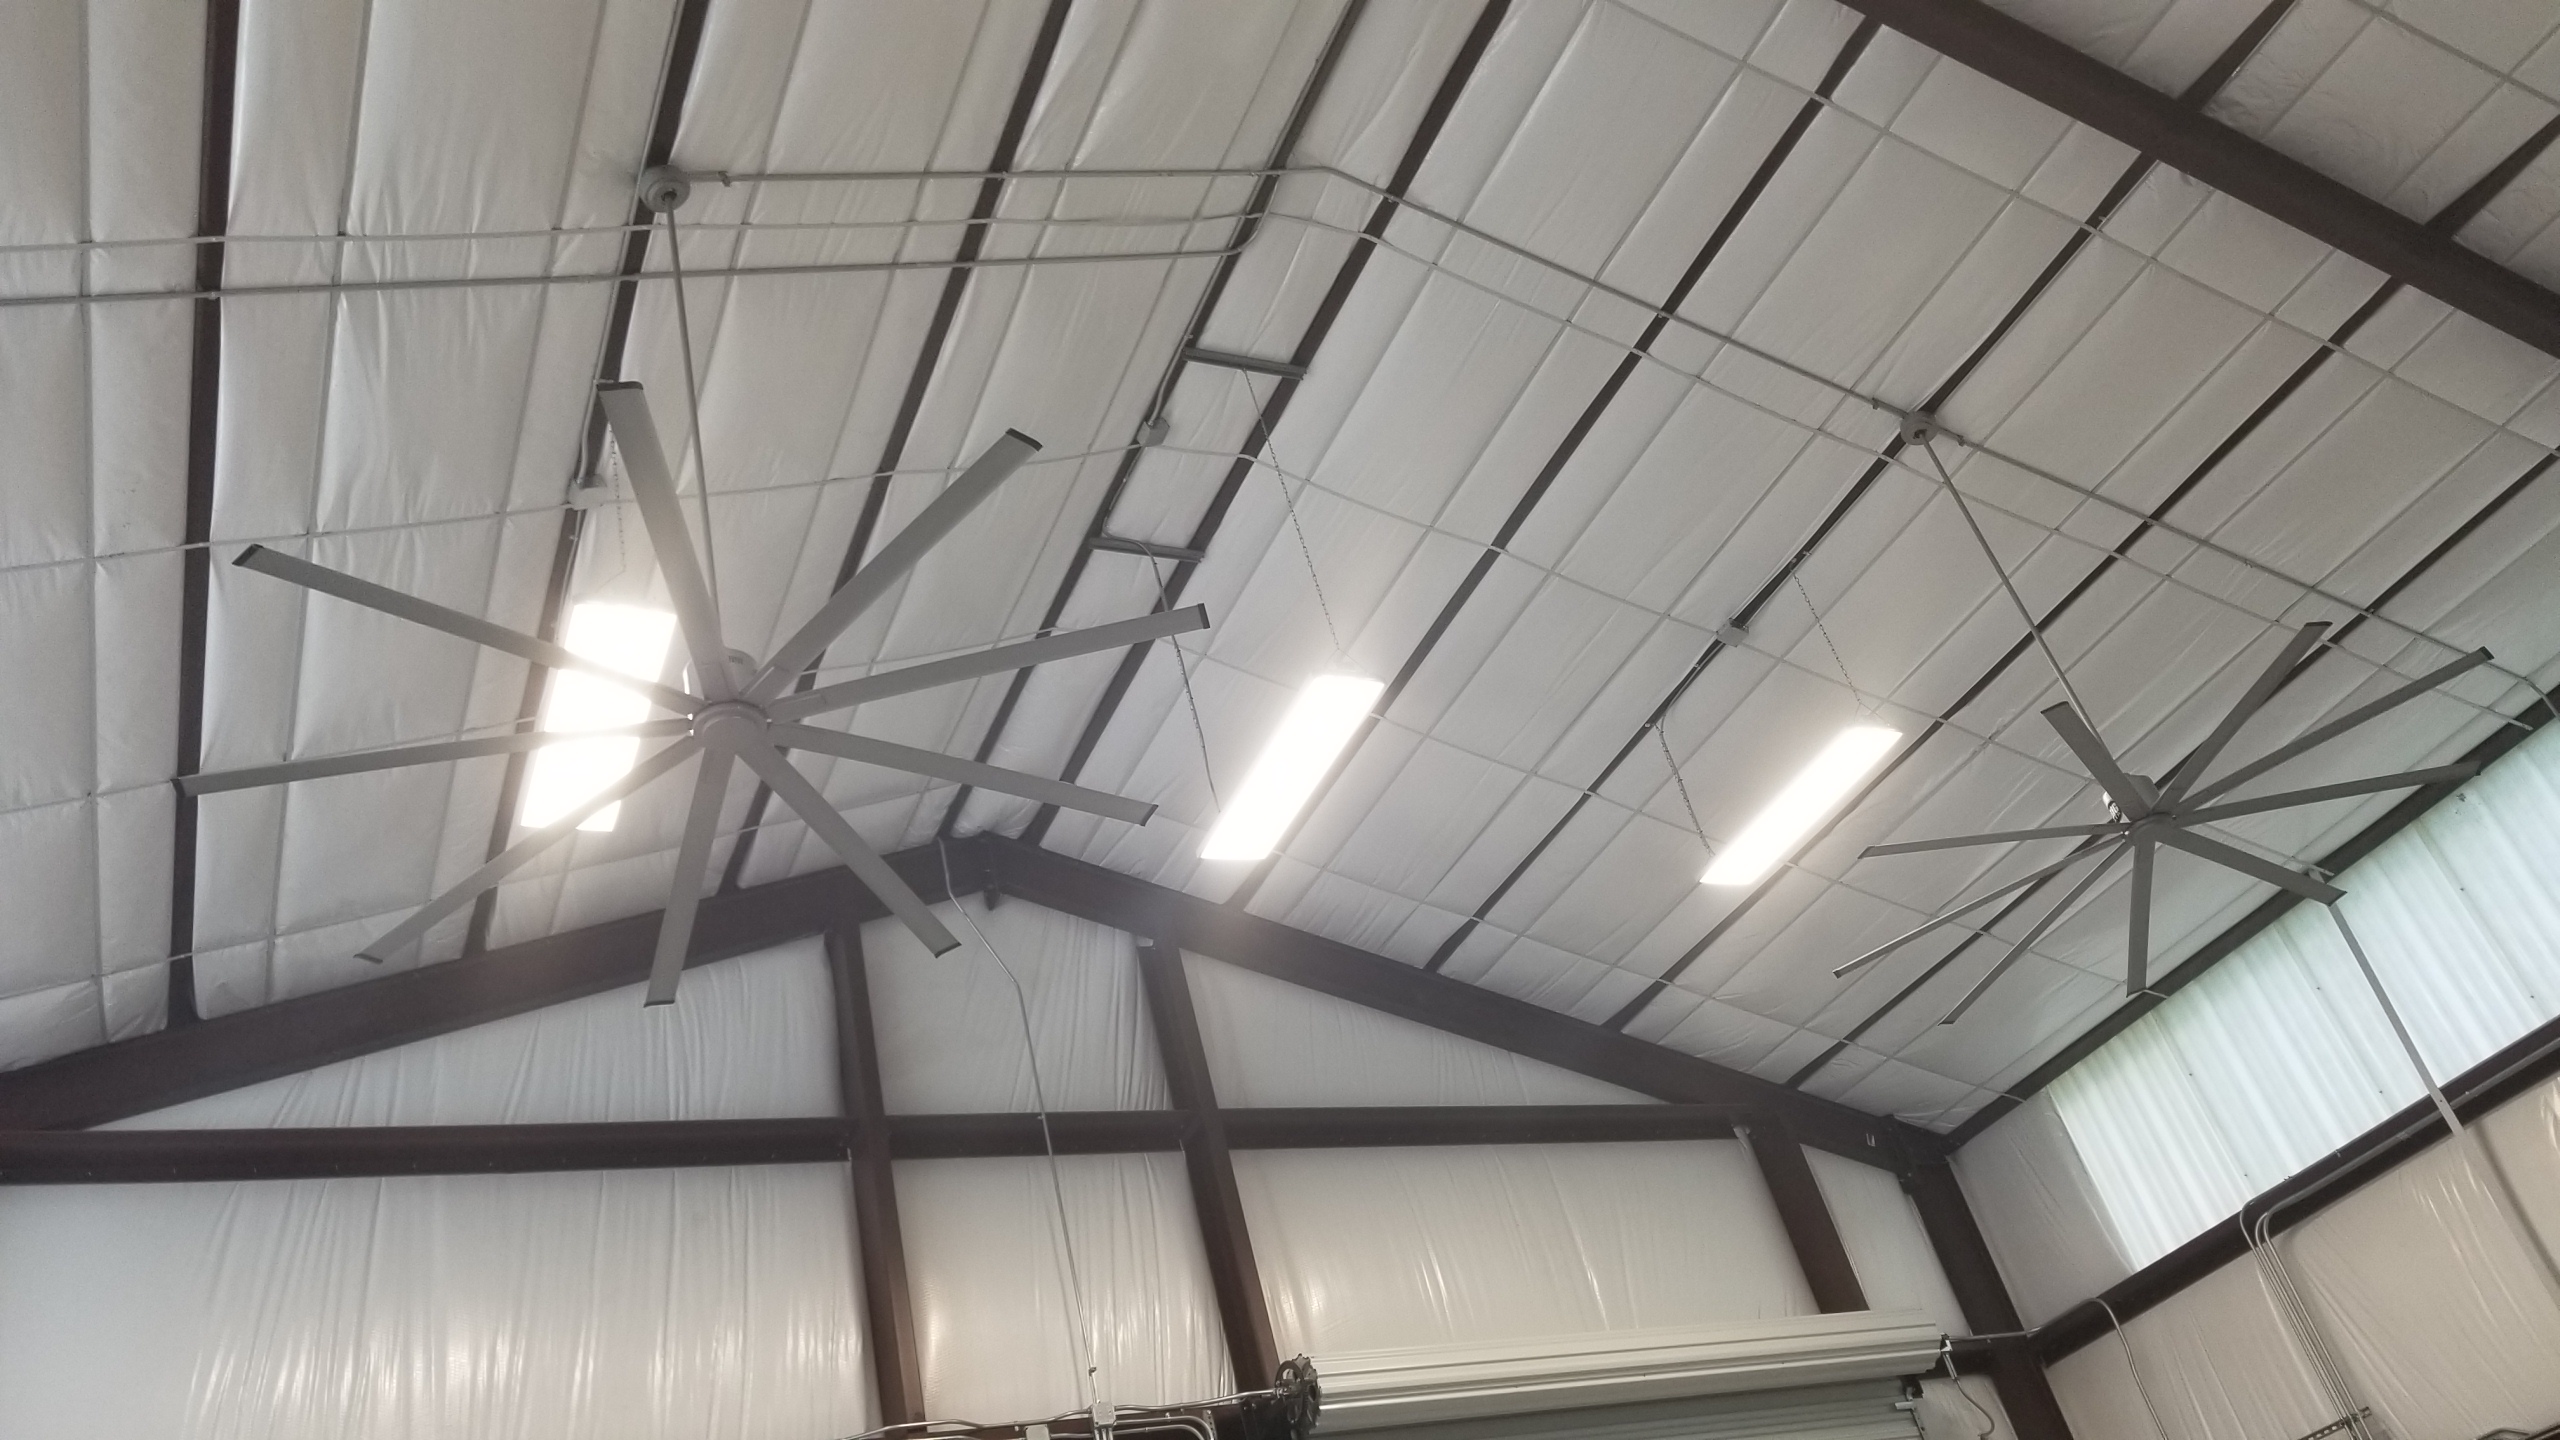 High Bay LED Lights and Large Ceiling Fans